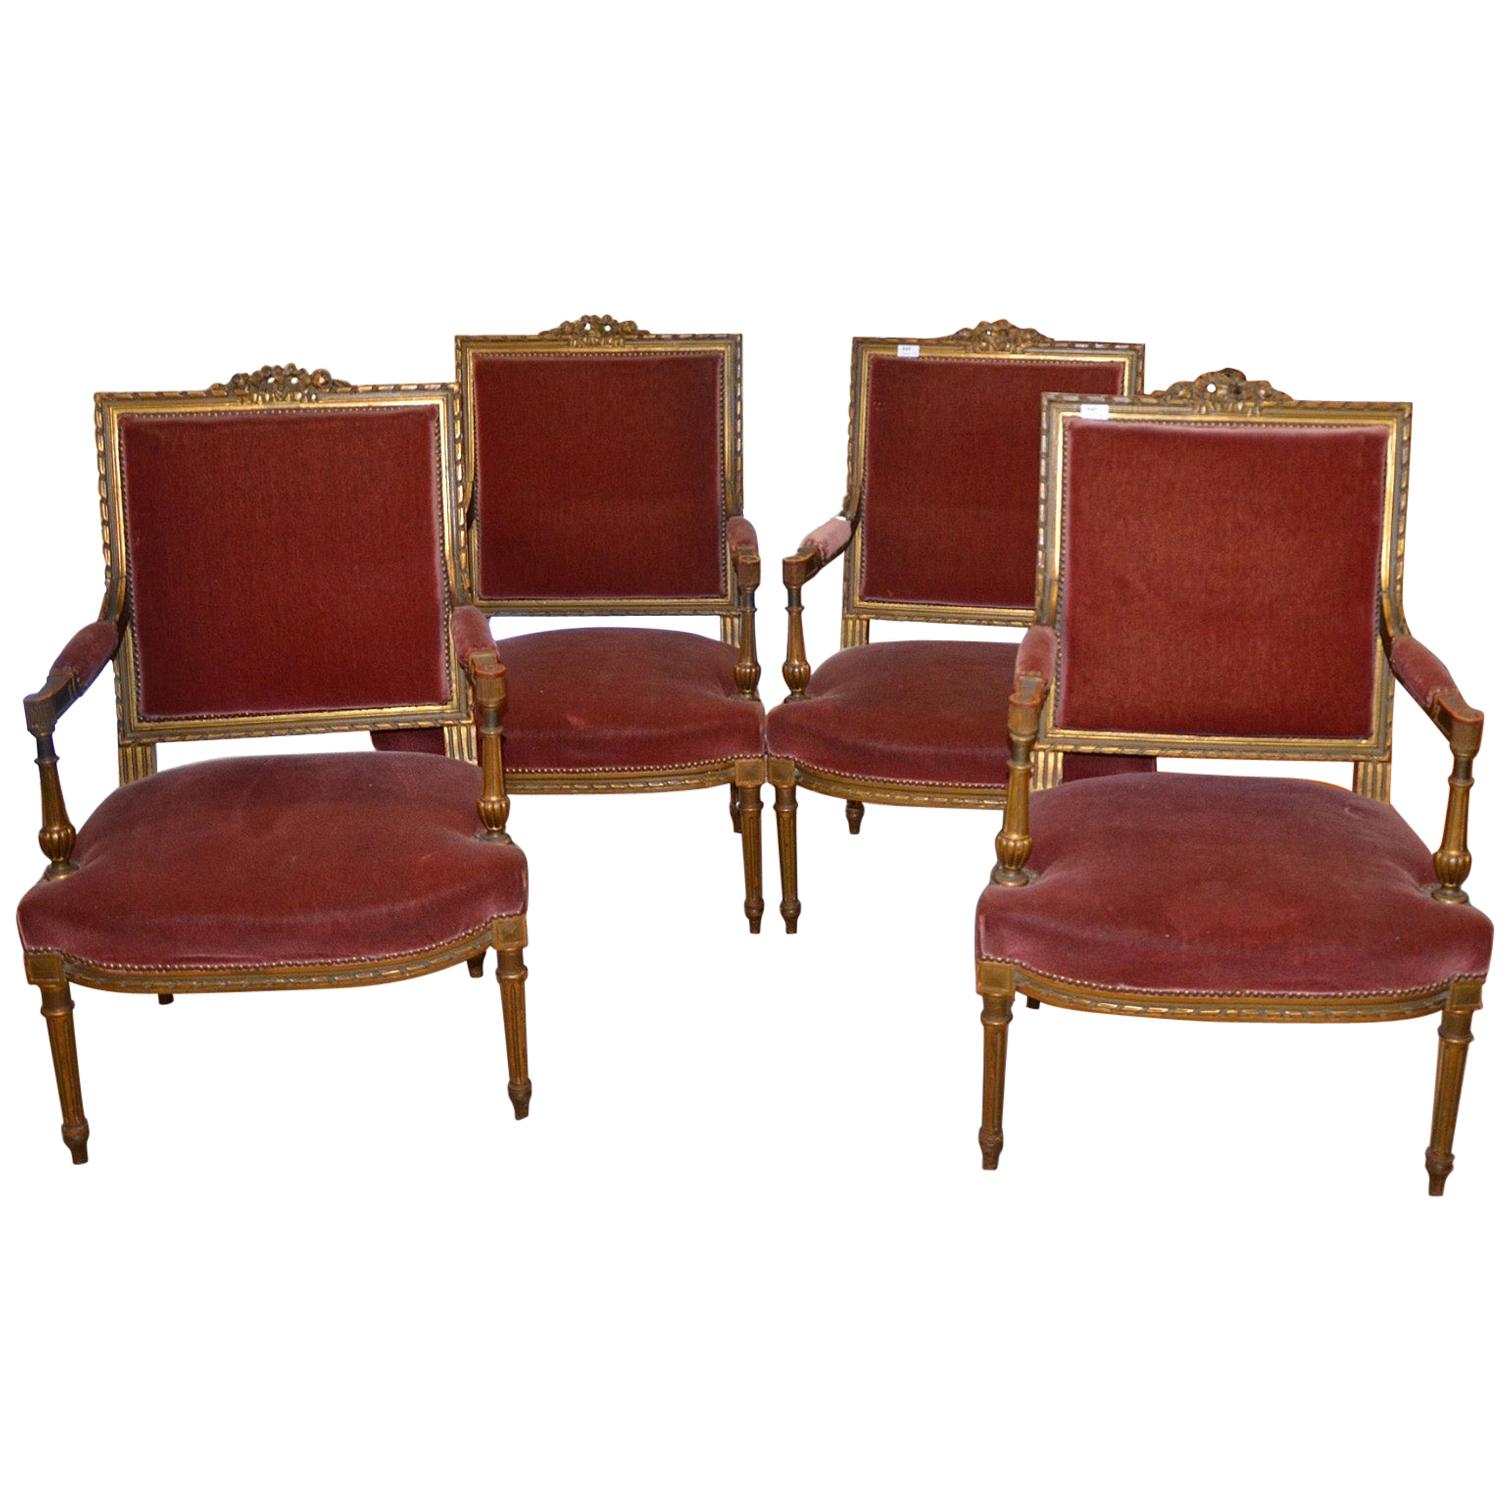 4 Louis XVI Style Chairs, Napoleon III Period, Partially Gilded For Sale